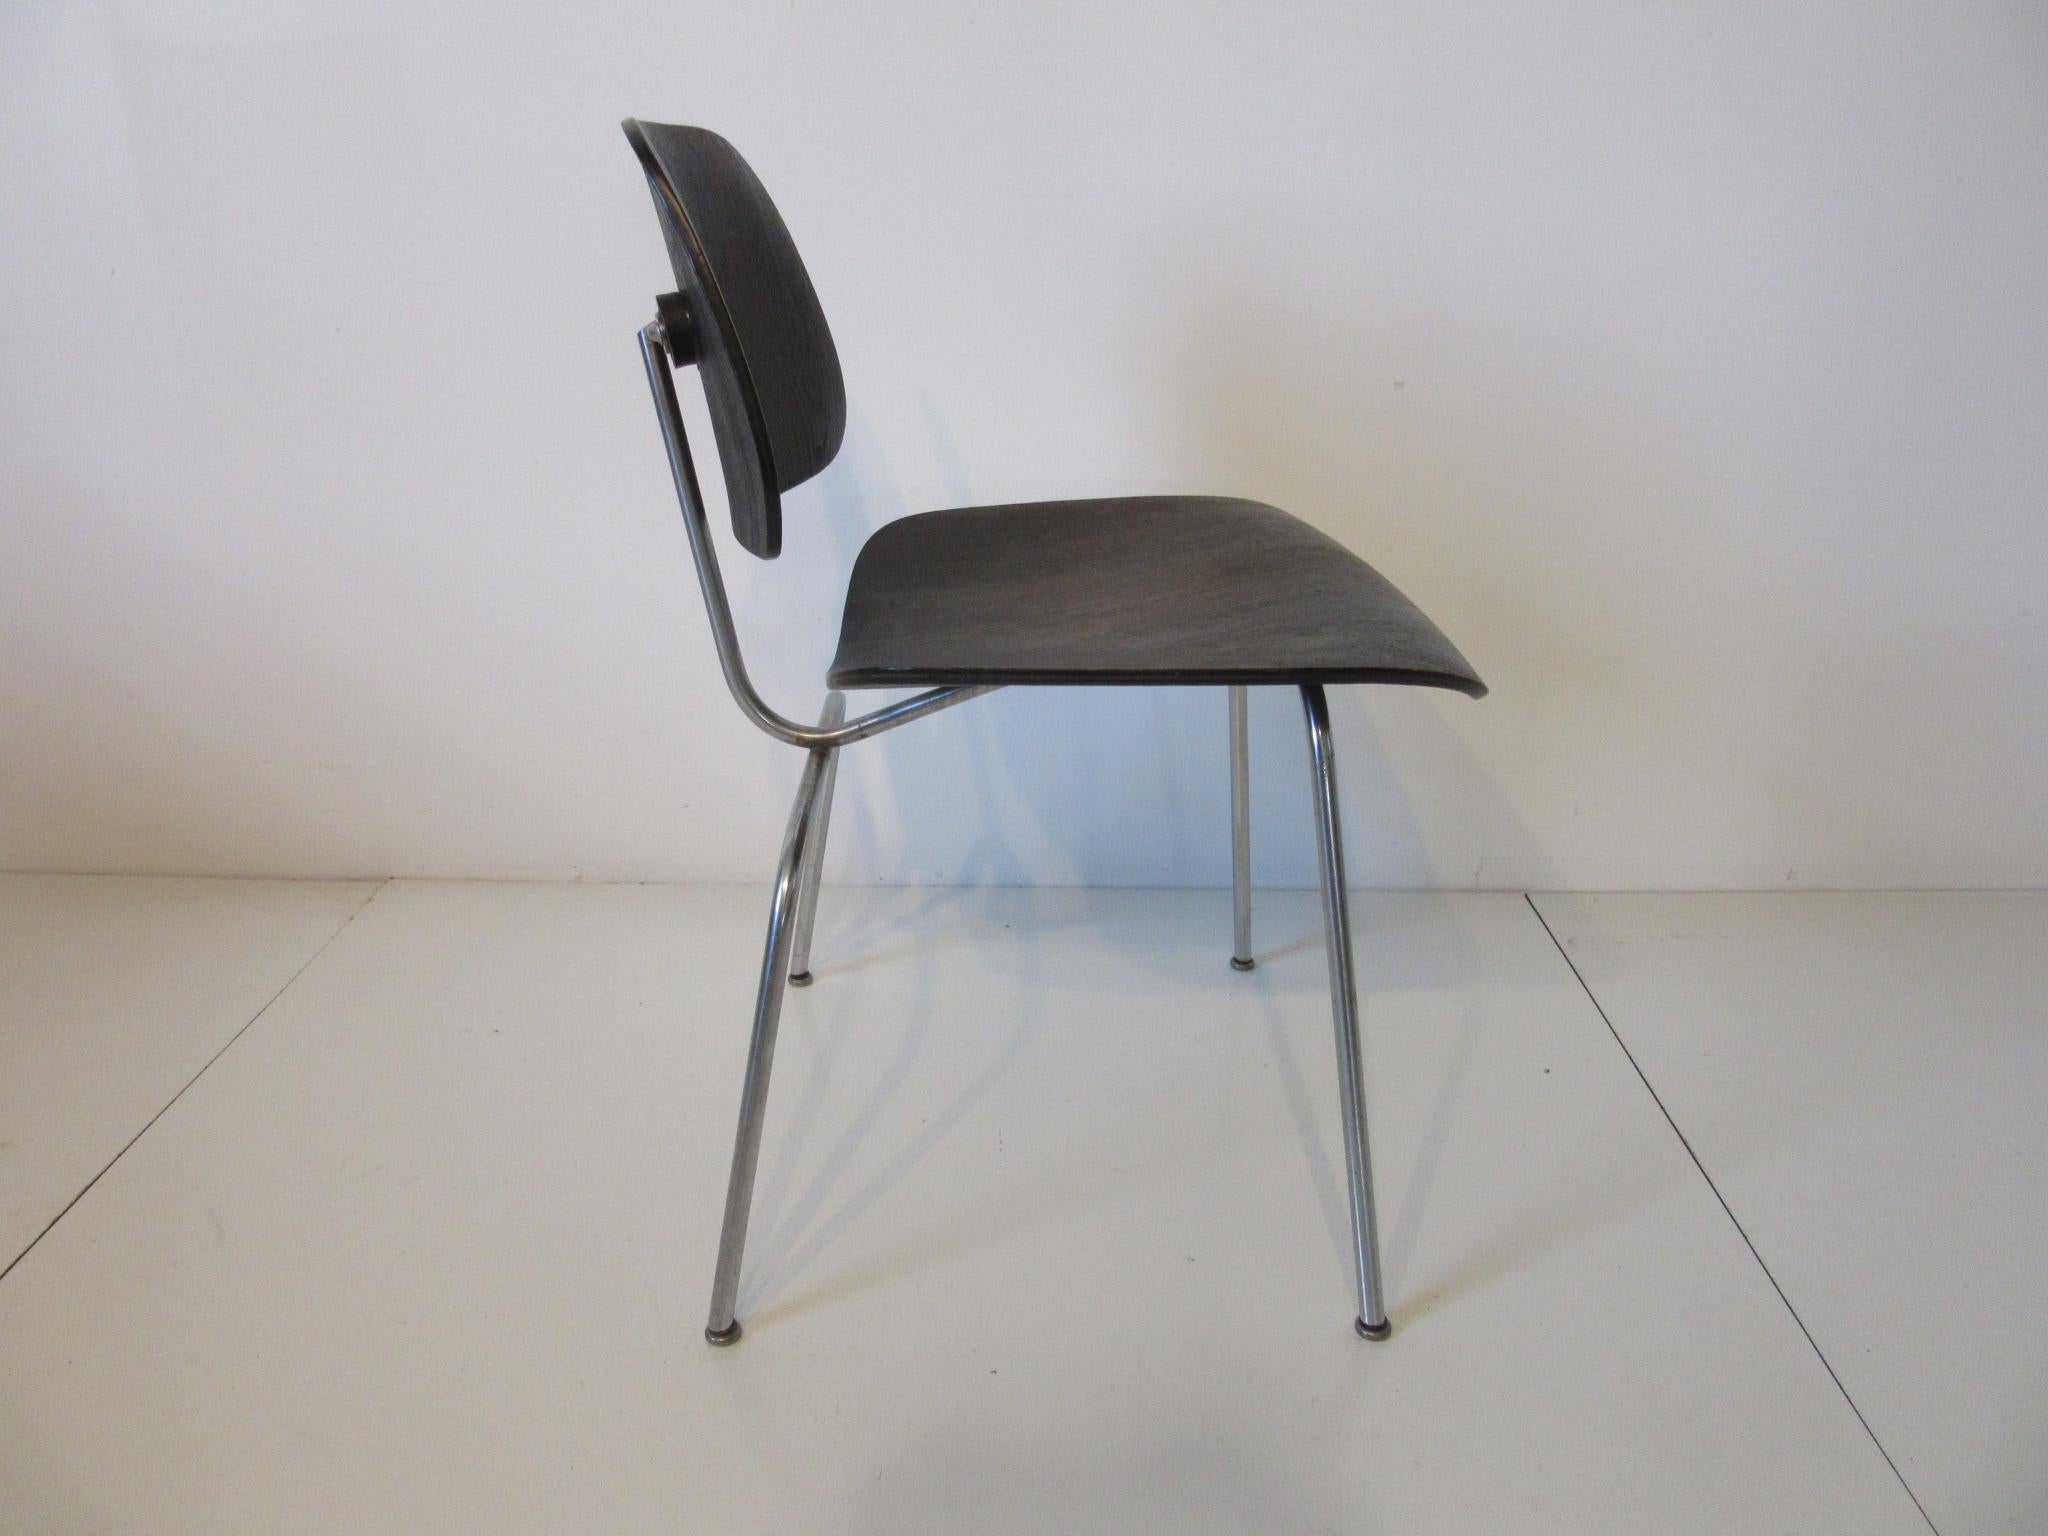 Black aniline dyed wood seat and back DCM (dining chair metal) chromed metal framed side chair, domes of silence foot pads and early foil label. Herman Miller label designed by Charles Eames.